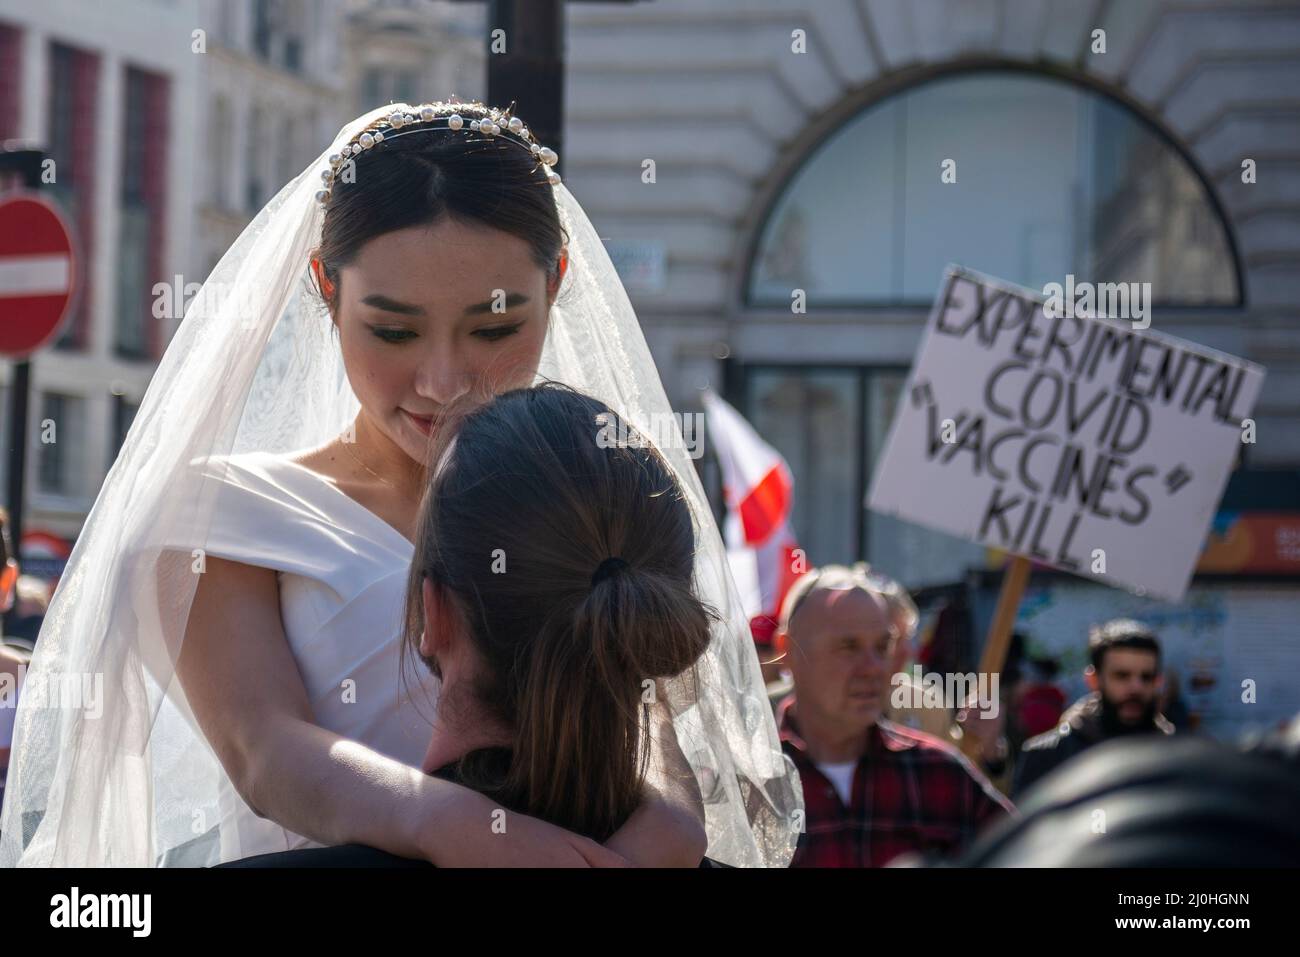 Westminster, London, UK. 19th Mar, 2022.A protest is taking place against vaccinating children for Covid 19, joined by anti-vaxxers. The march interrupted a wedding dress photoshoot with the Asian bride and white groom continuing regardless. Covid placard Stock Photo